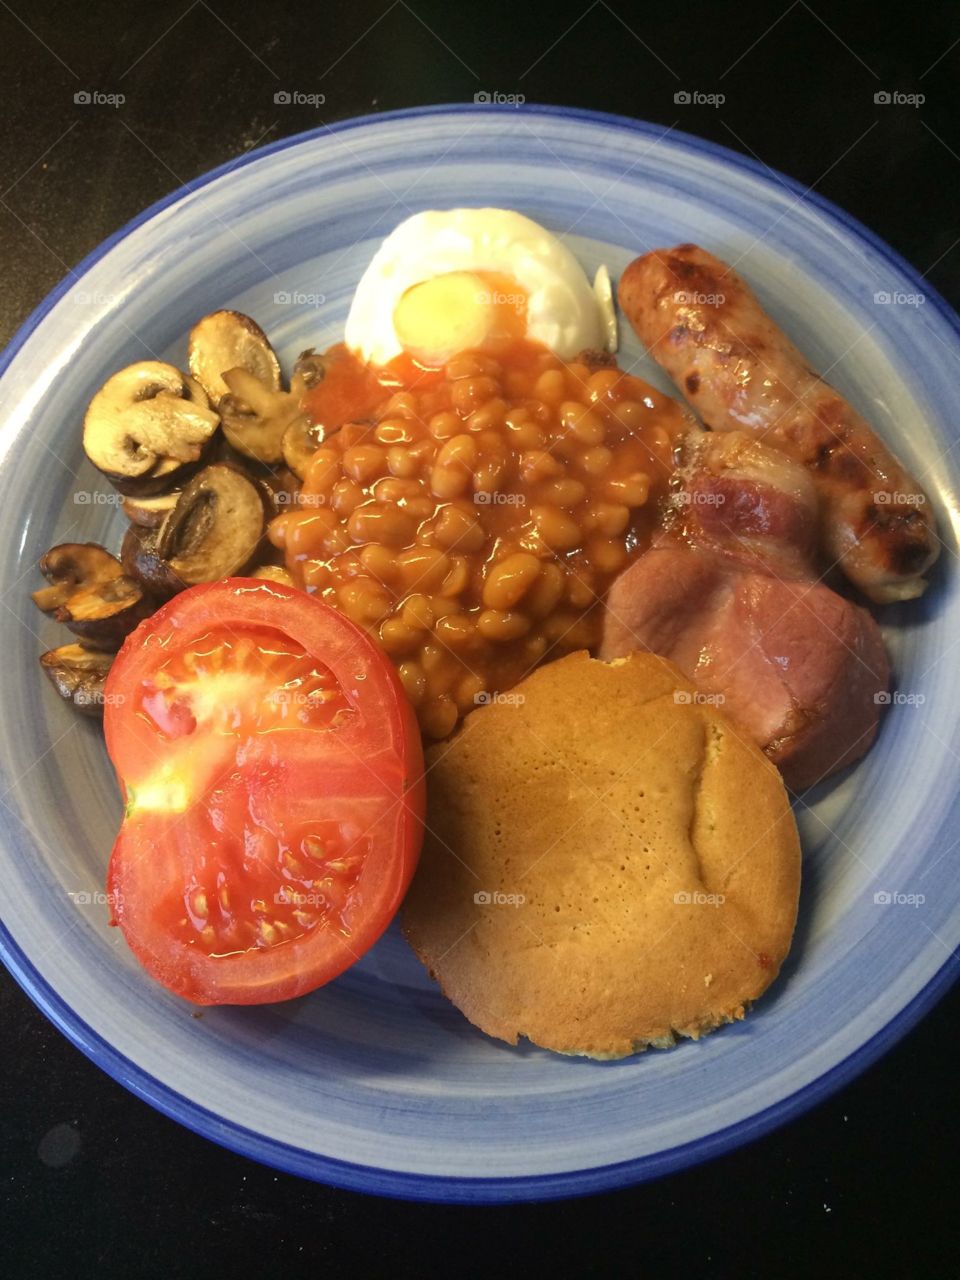 The most important meal of the day. A full English breakfast with a host of tasty foods 